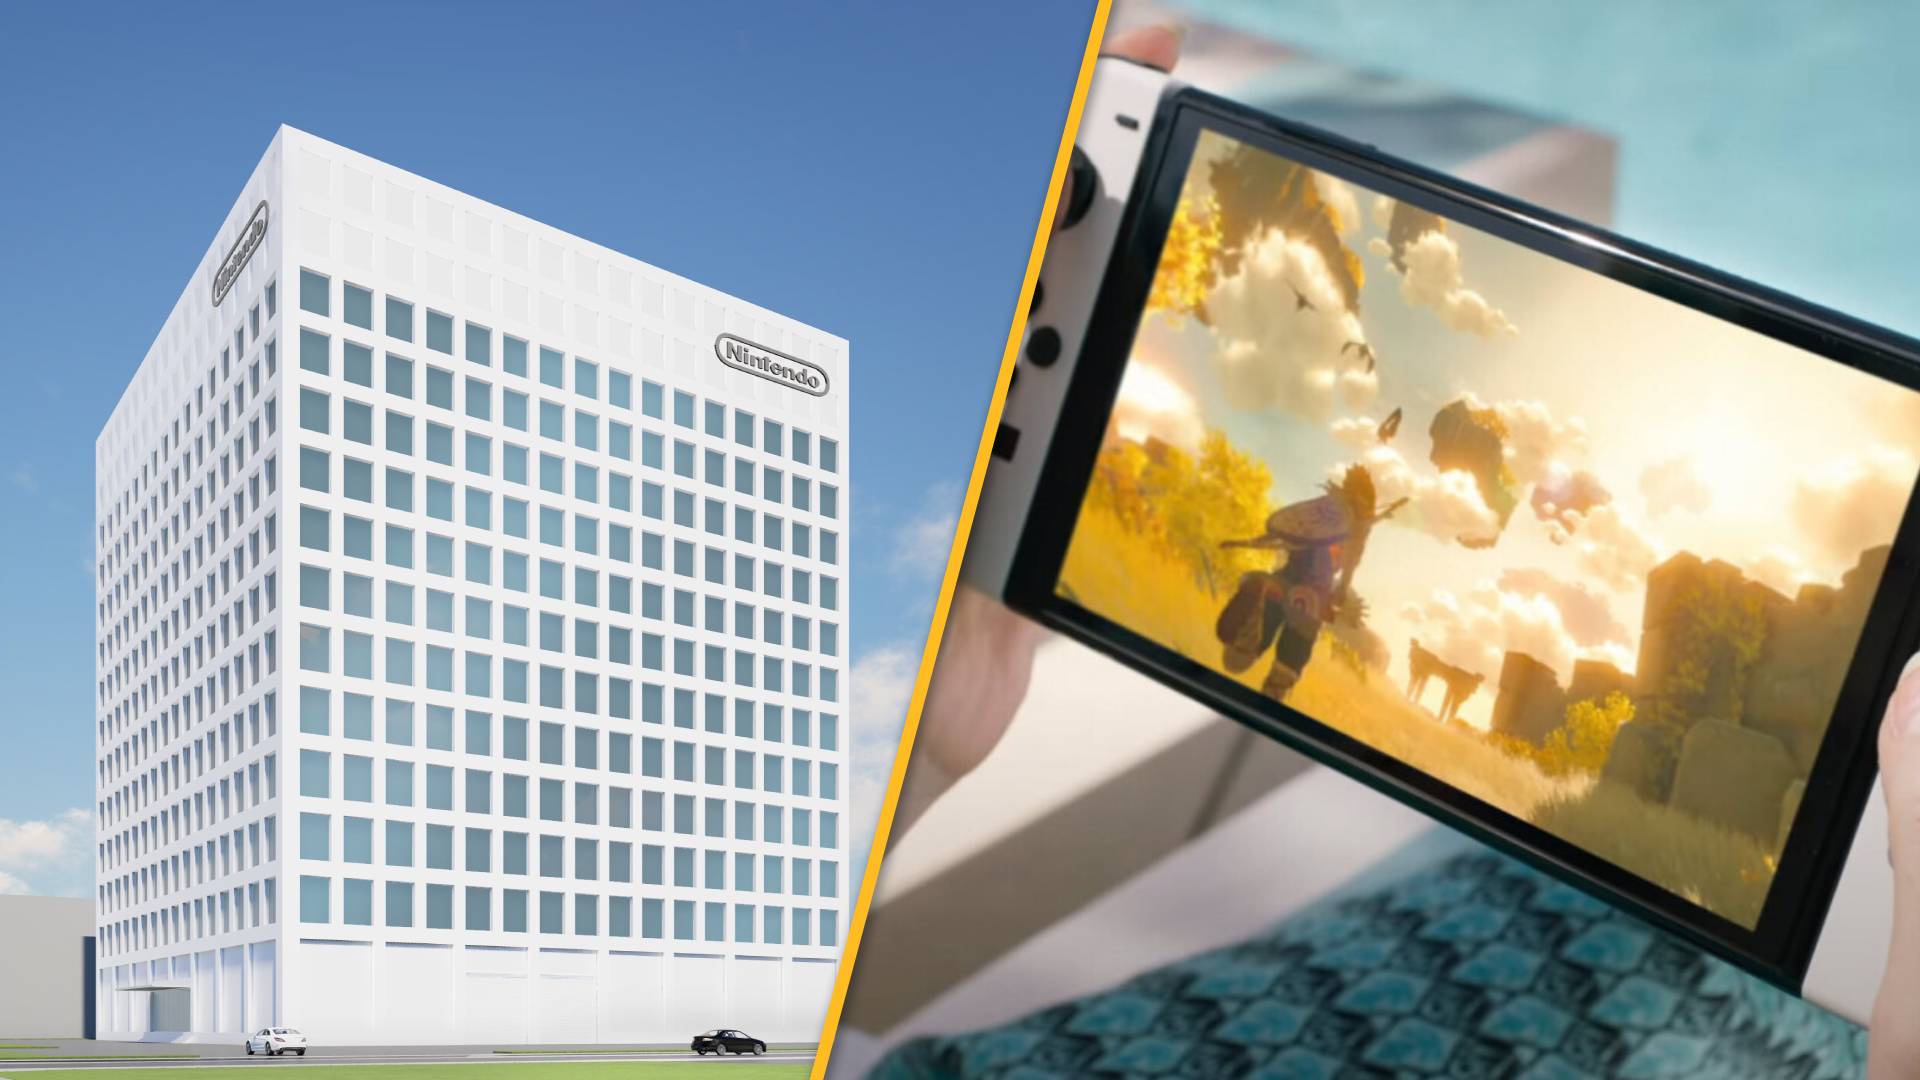 Nintendo buys a huge plot of land with aims to expand HQ